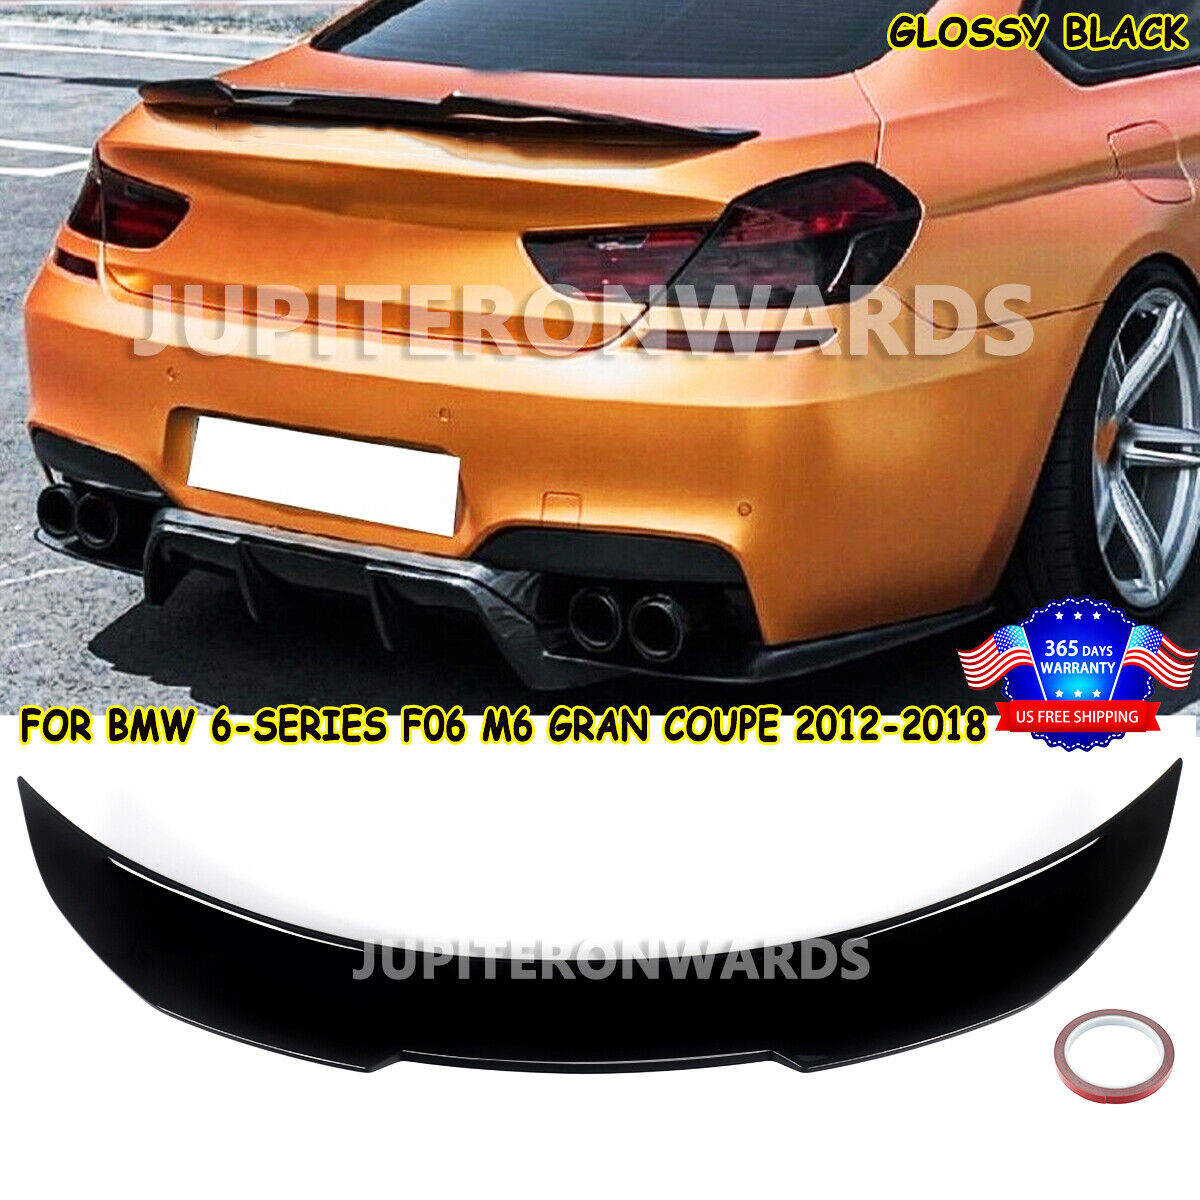 Glossy Black High-kick Wing Trunk Spoiler For BMW F06 640i 650i M6 4DR 2012-2018